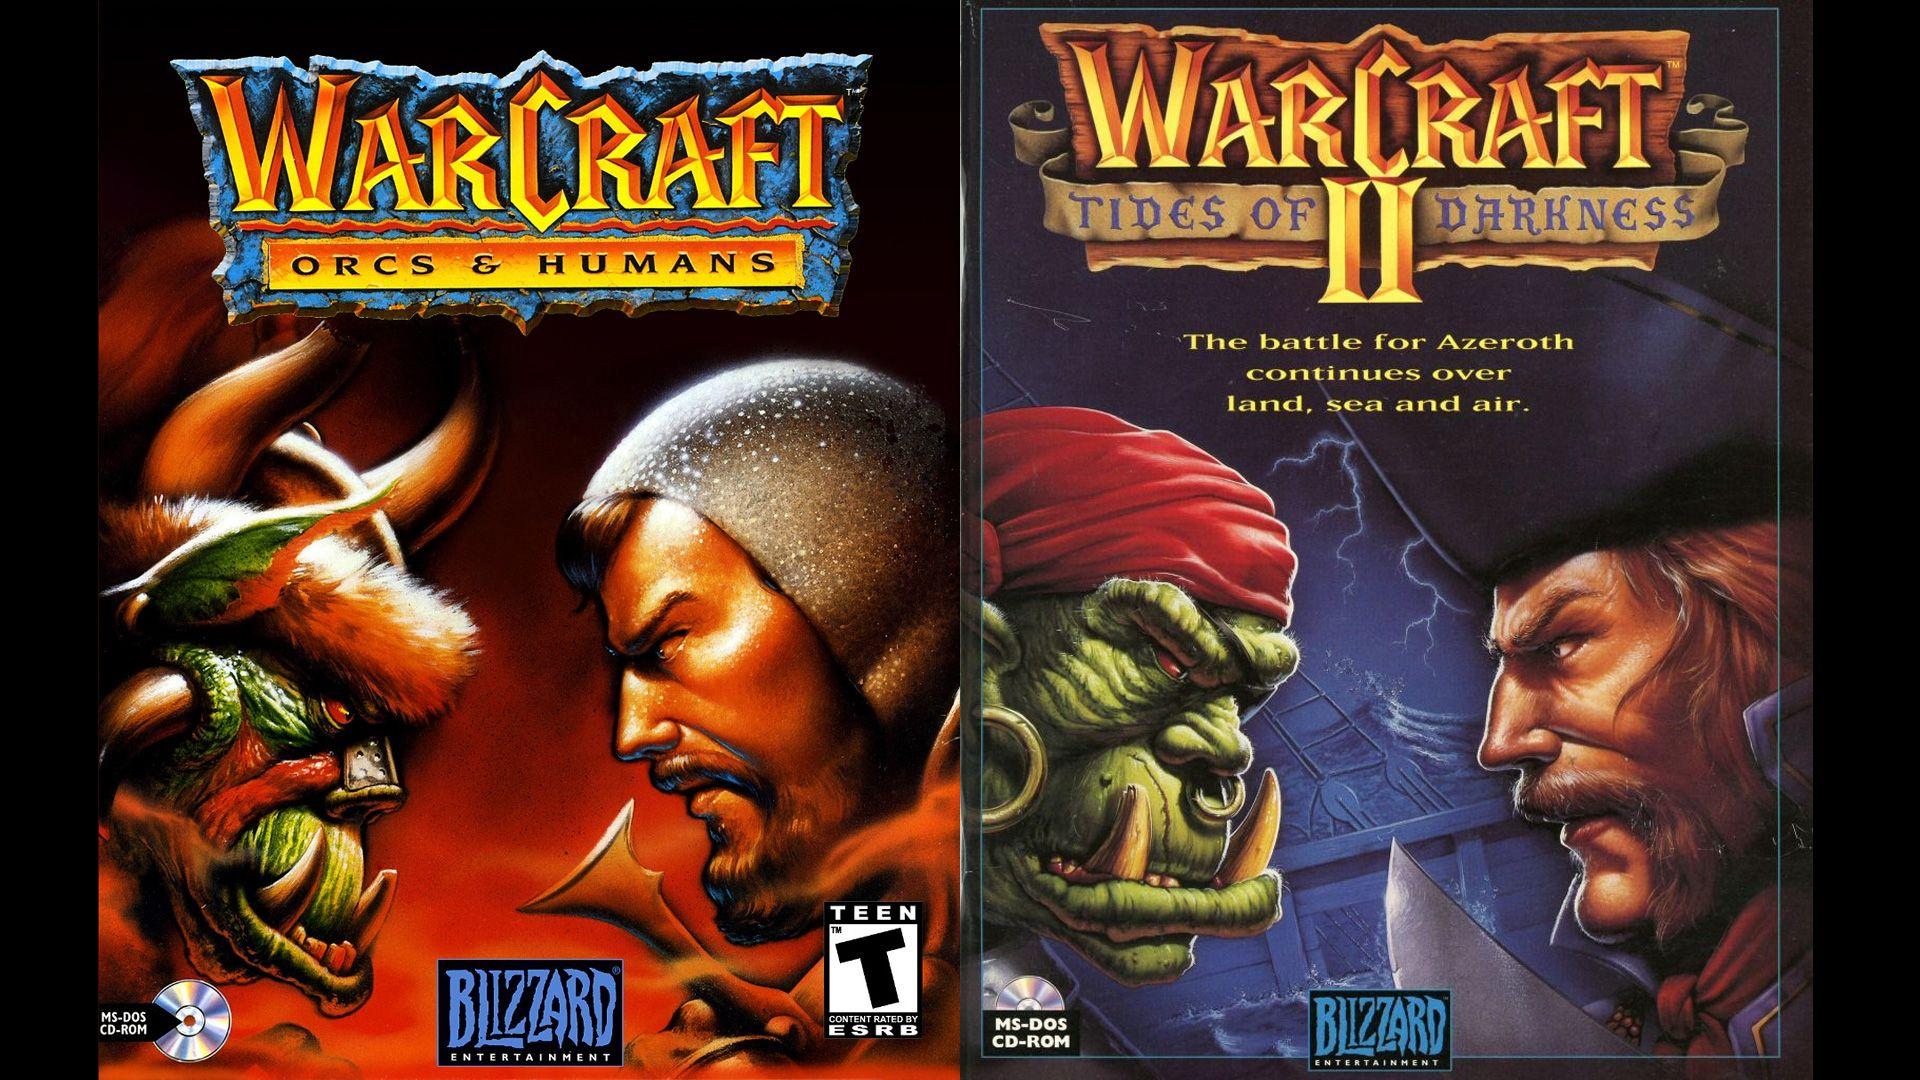 will there be a warcraft 2 movie